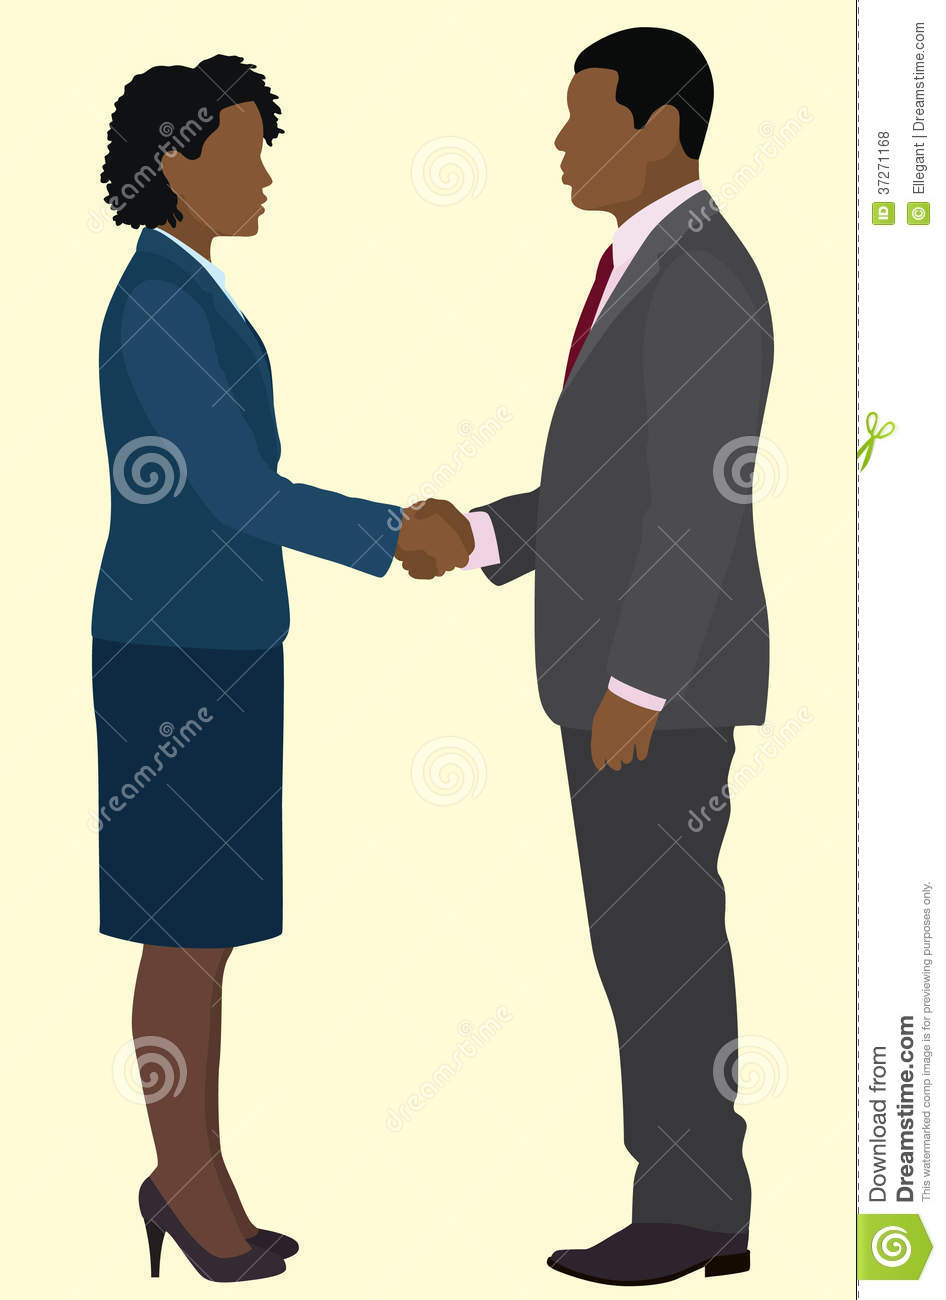 Black Business Man And Woman Royalty Free Stock Photos   Image